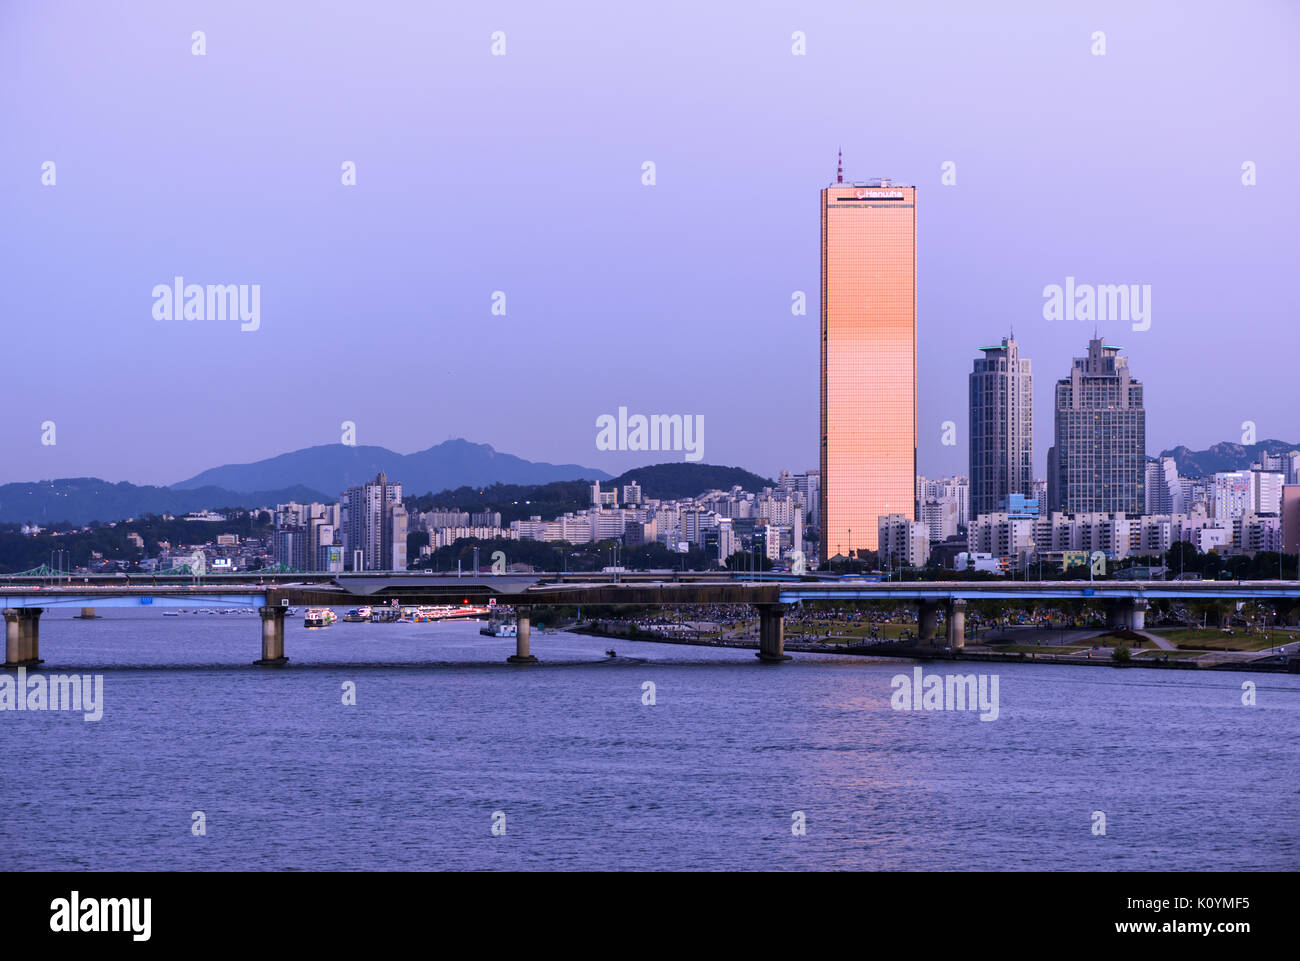 Seoul, Republic of Korea - 27 September 2015: View on 63 Building. Yeouido island is main district for banking and finance in Seoul. Stock Photo